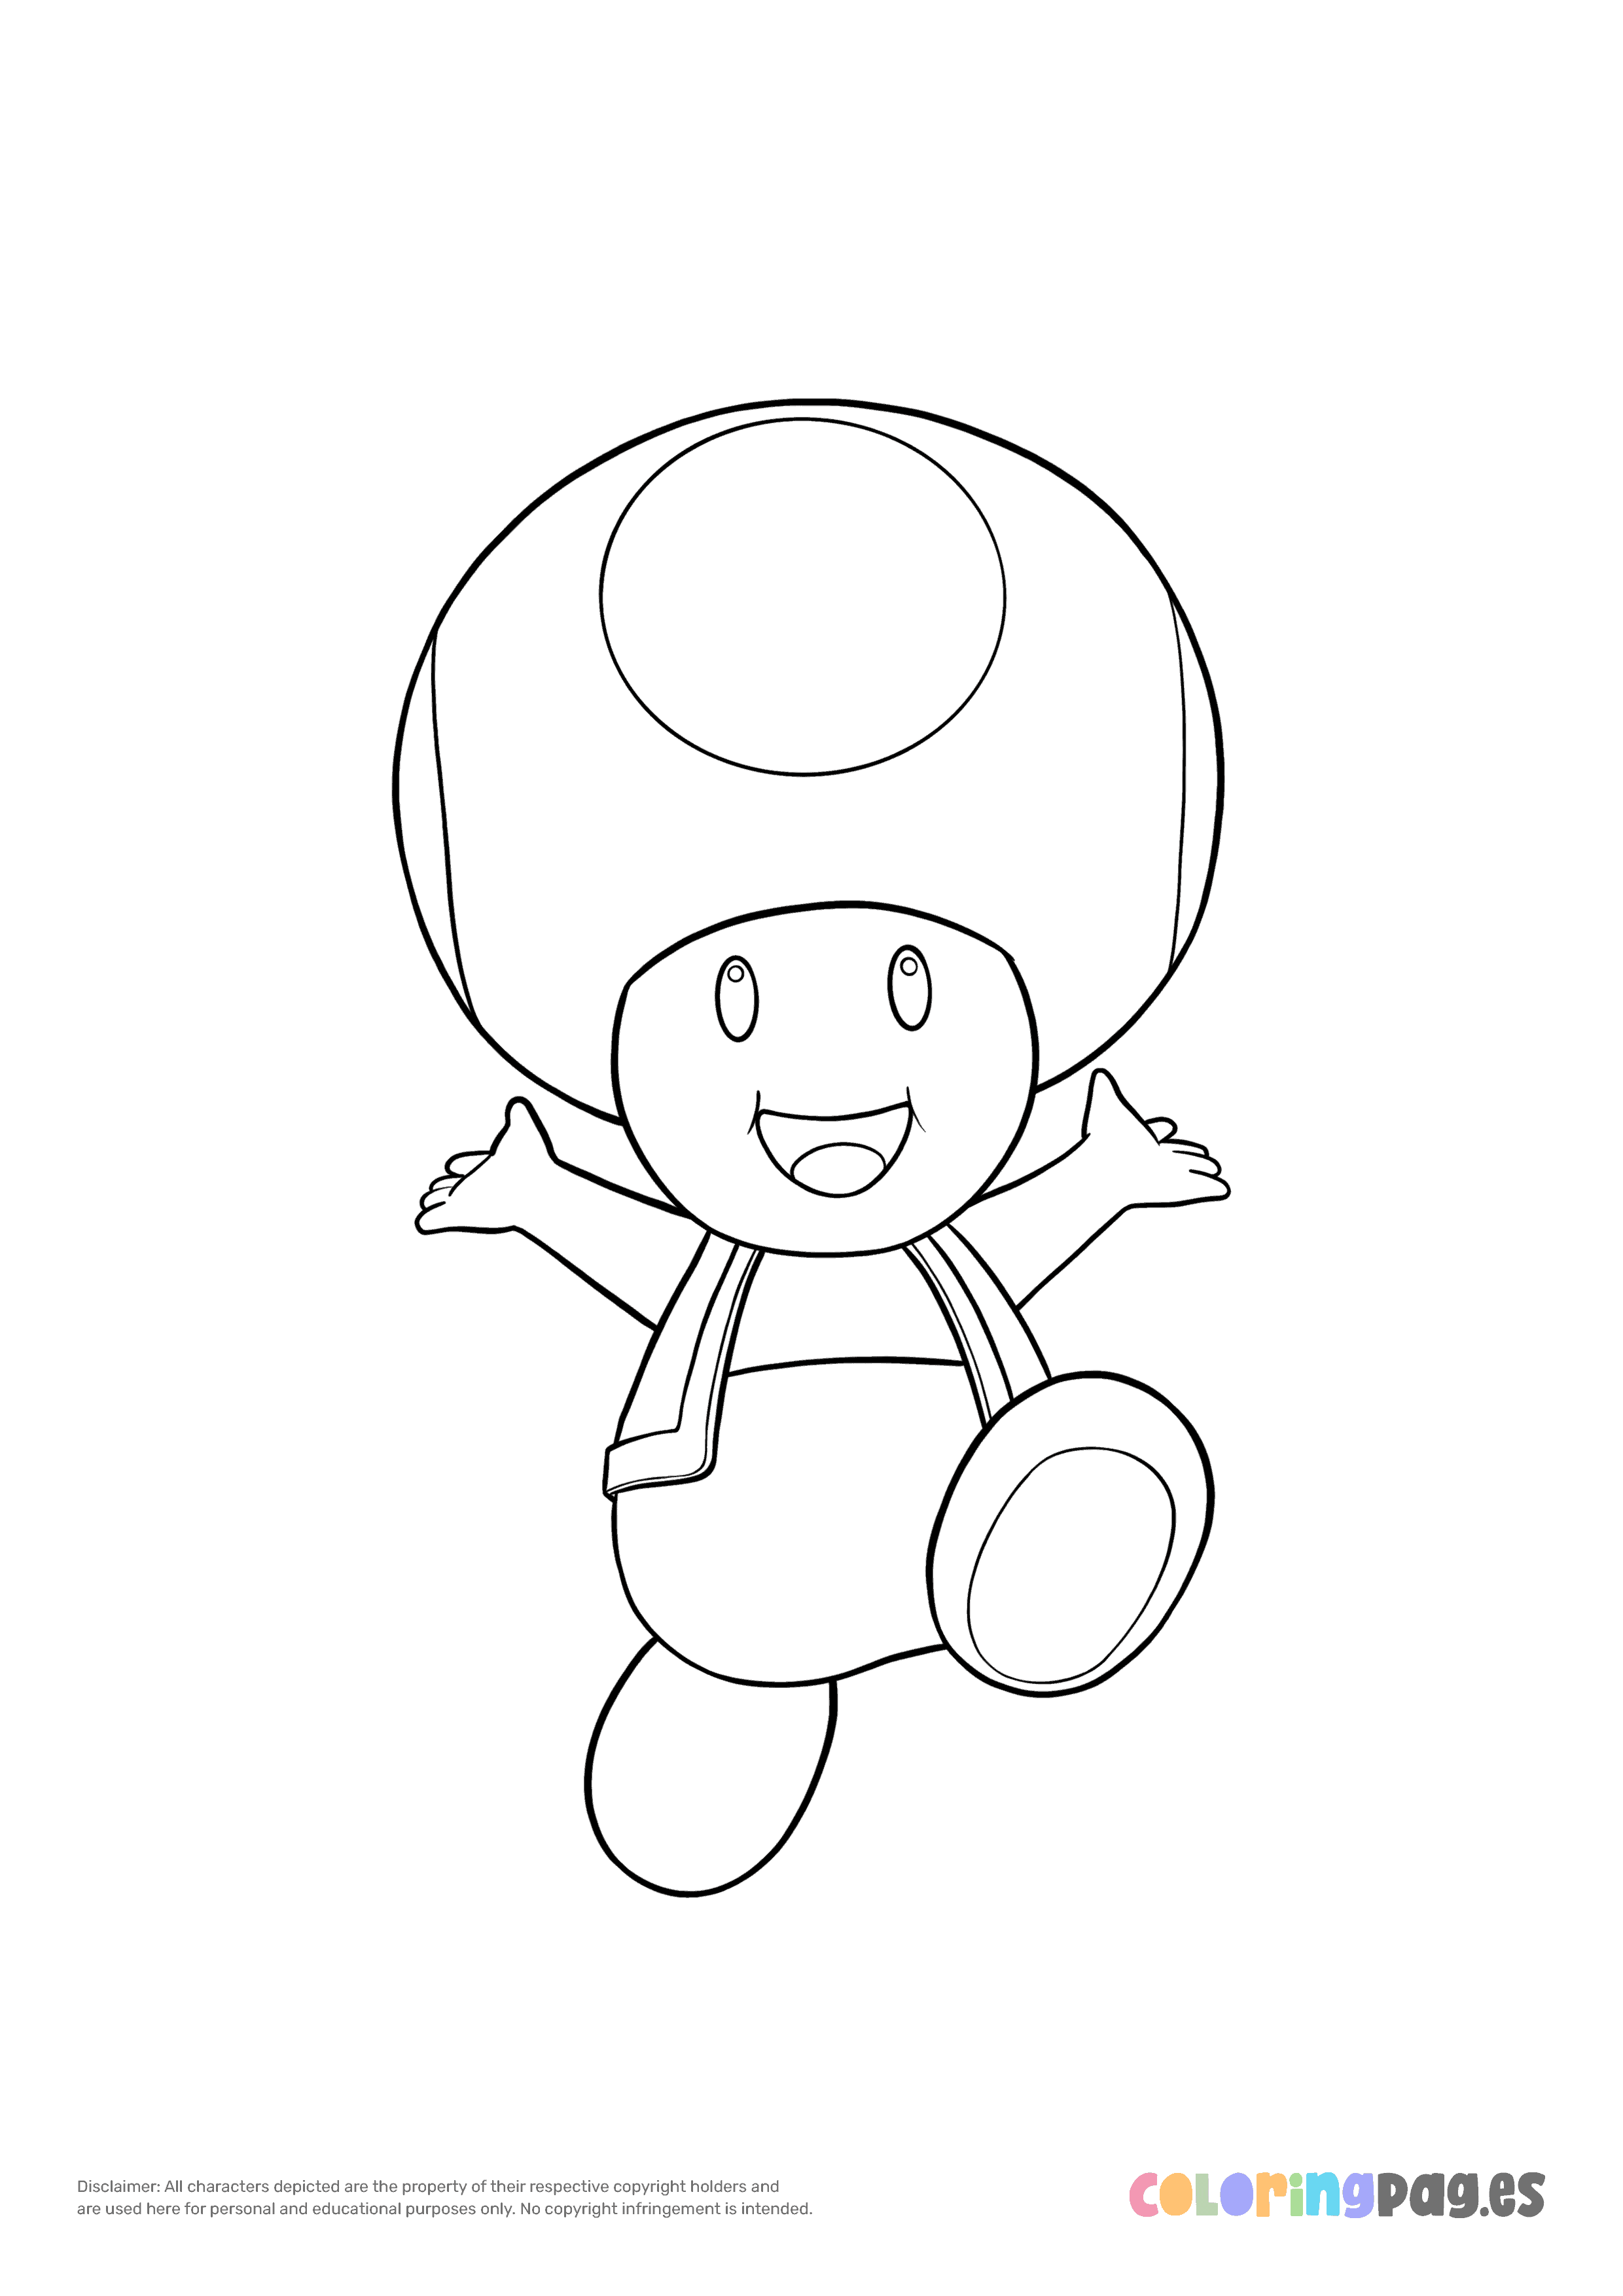 Toad coloring page